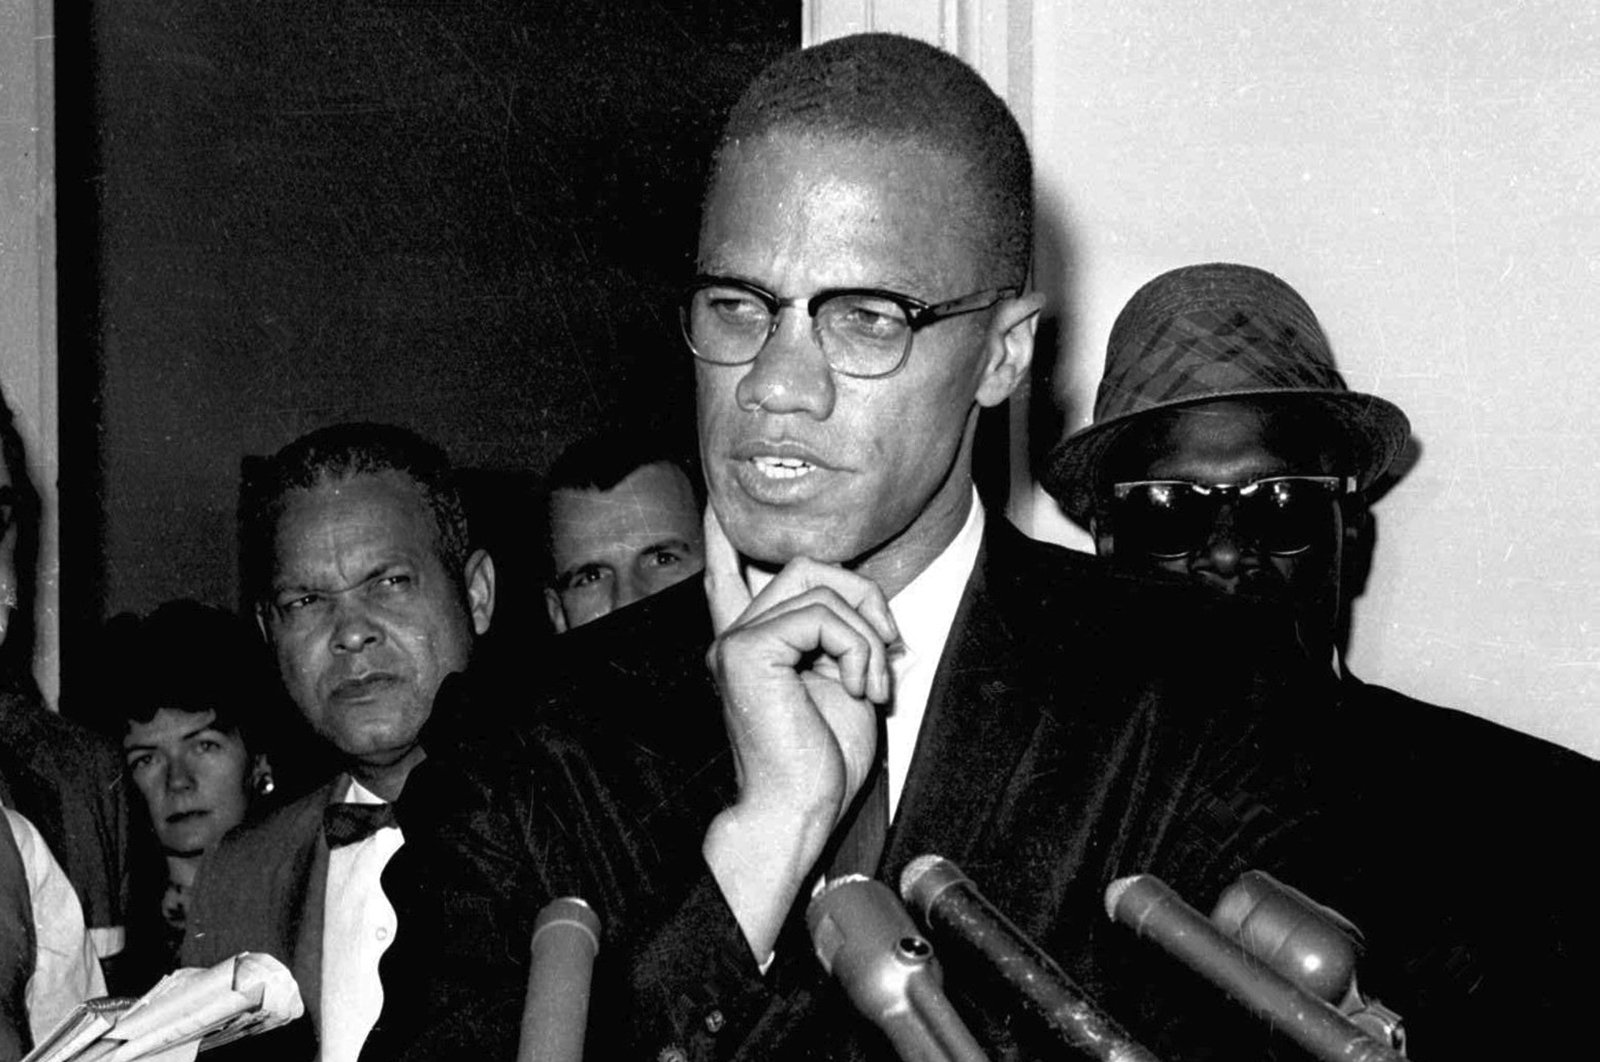 Malcolm X speaks to reporters in Washington, D.C., U.S., May 16, 1963. (AP Photo)